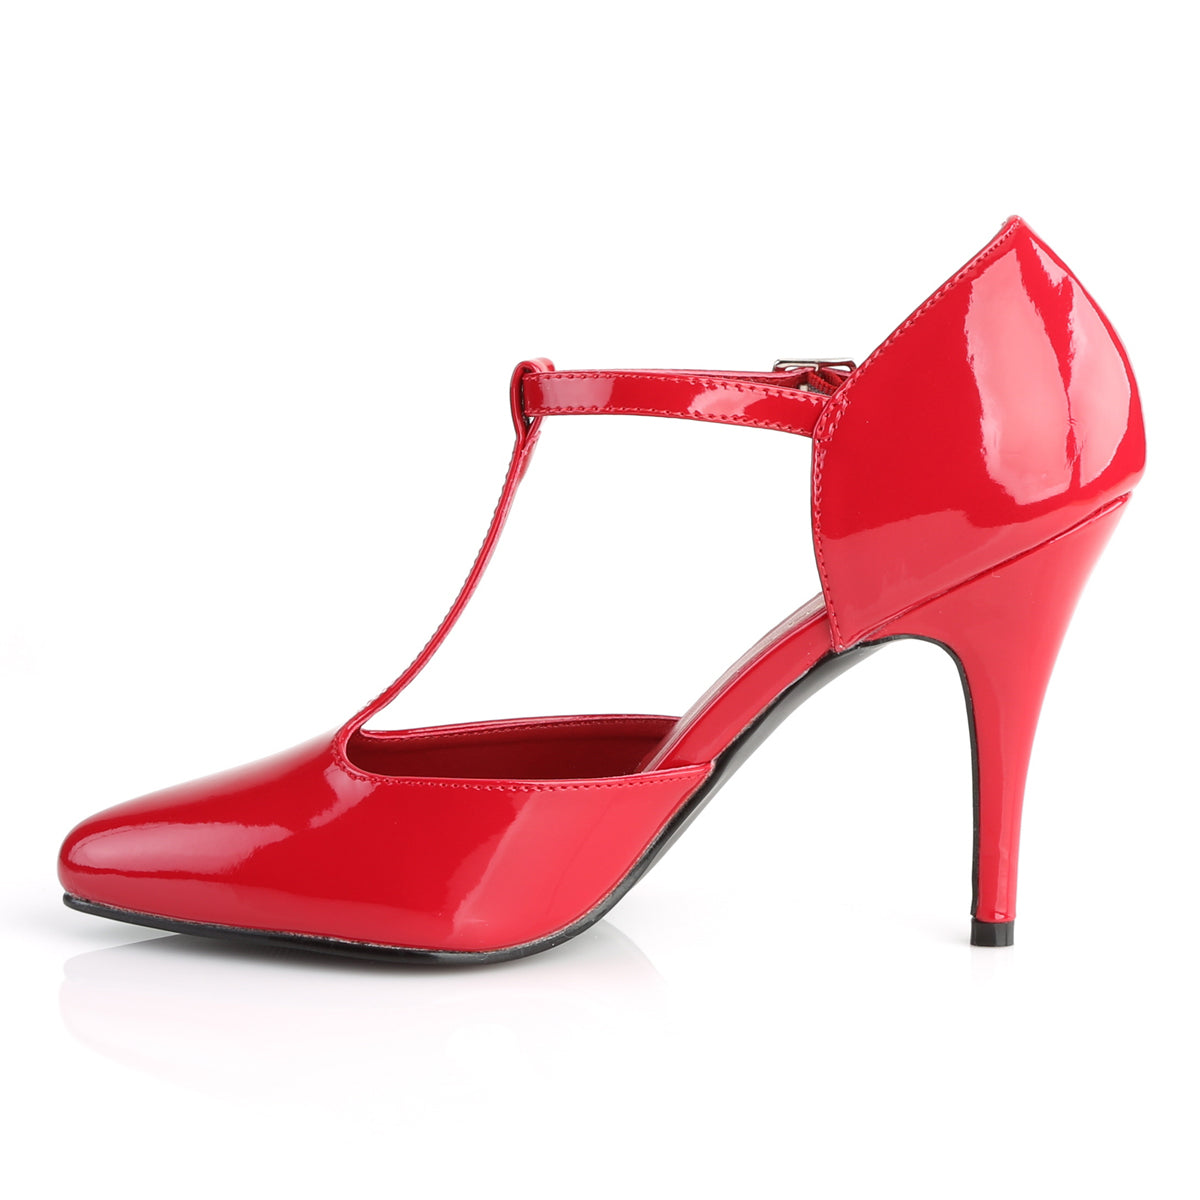 T-Strap D'Orsay Red Heels